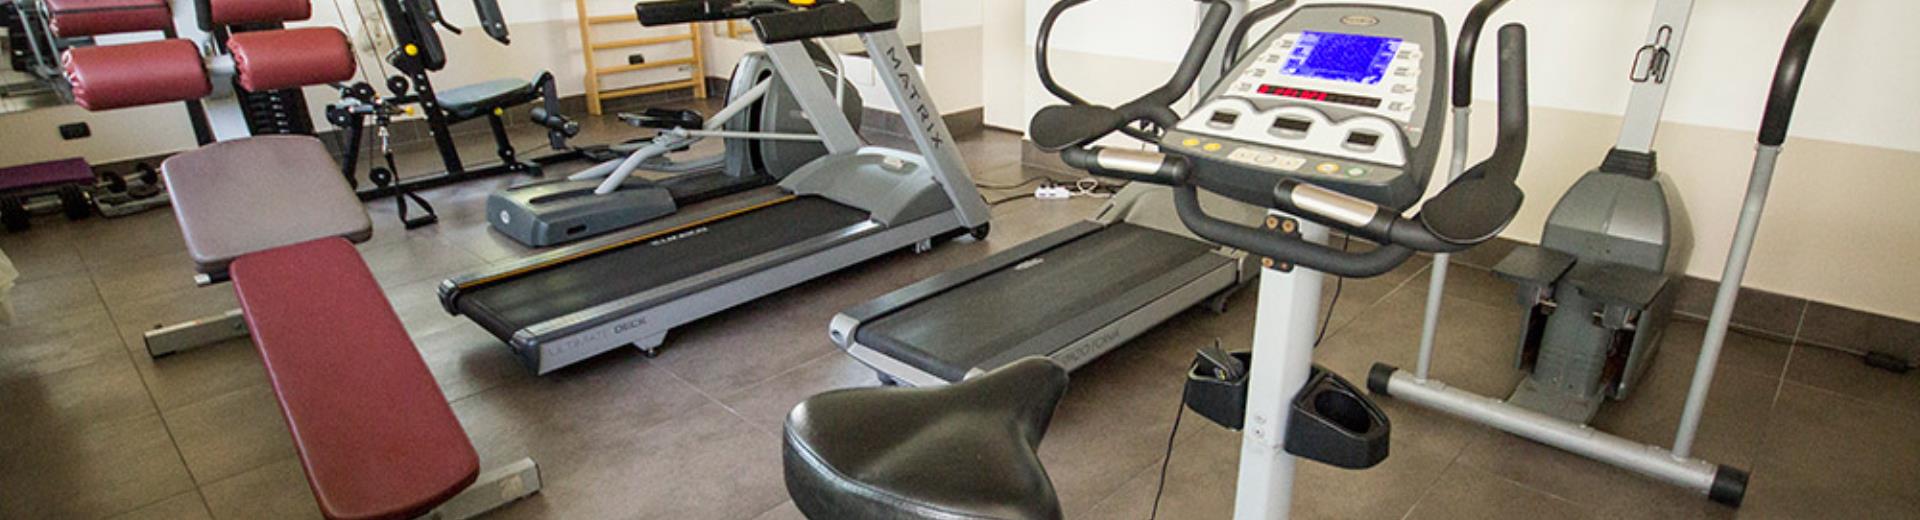 Picture of the indoor gym at the Hotel Modena Resort